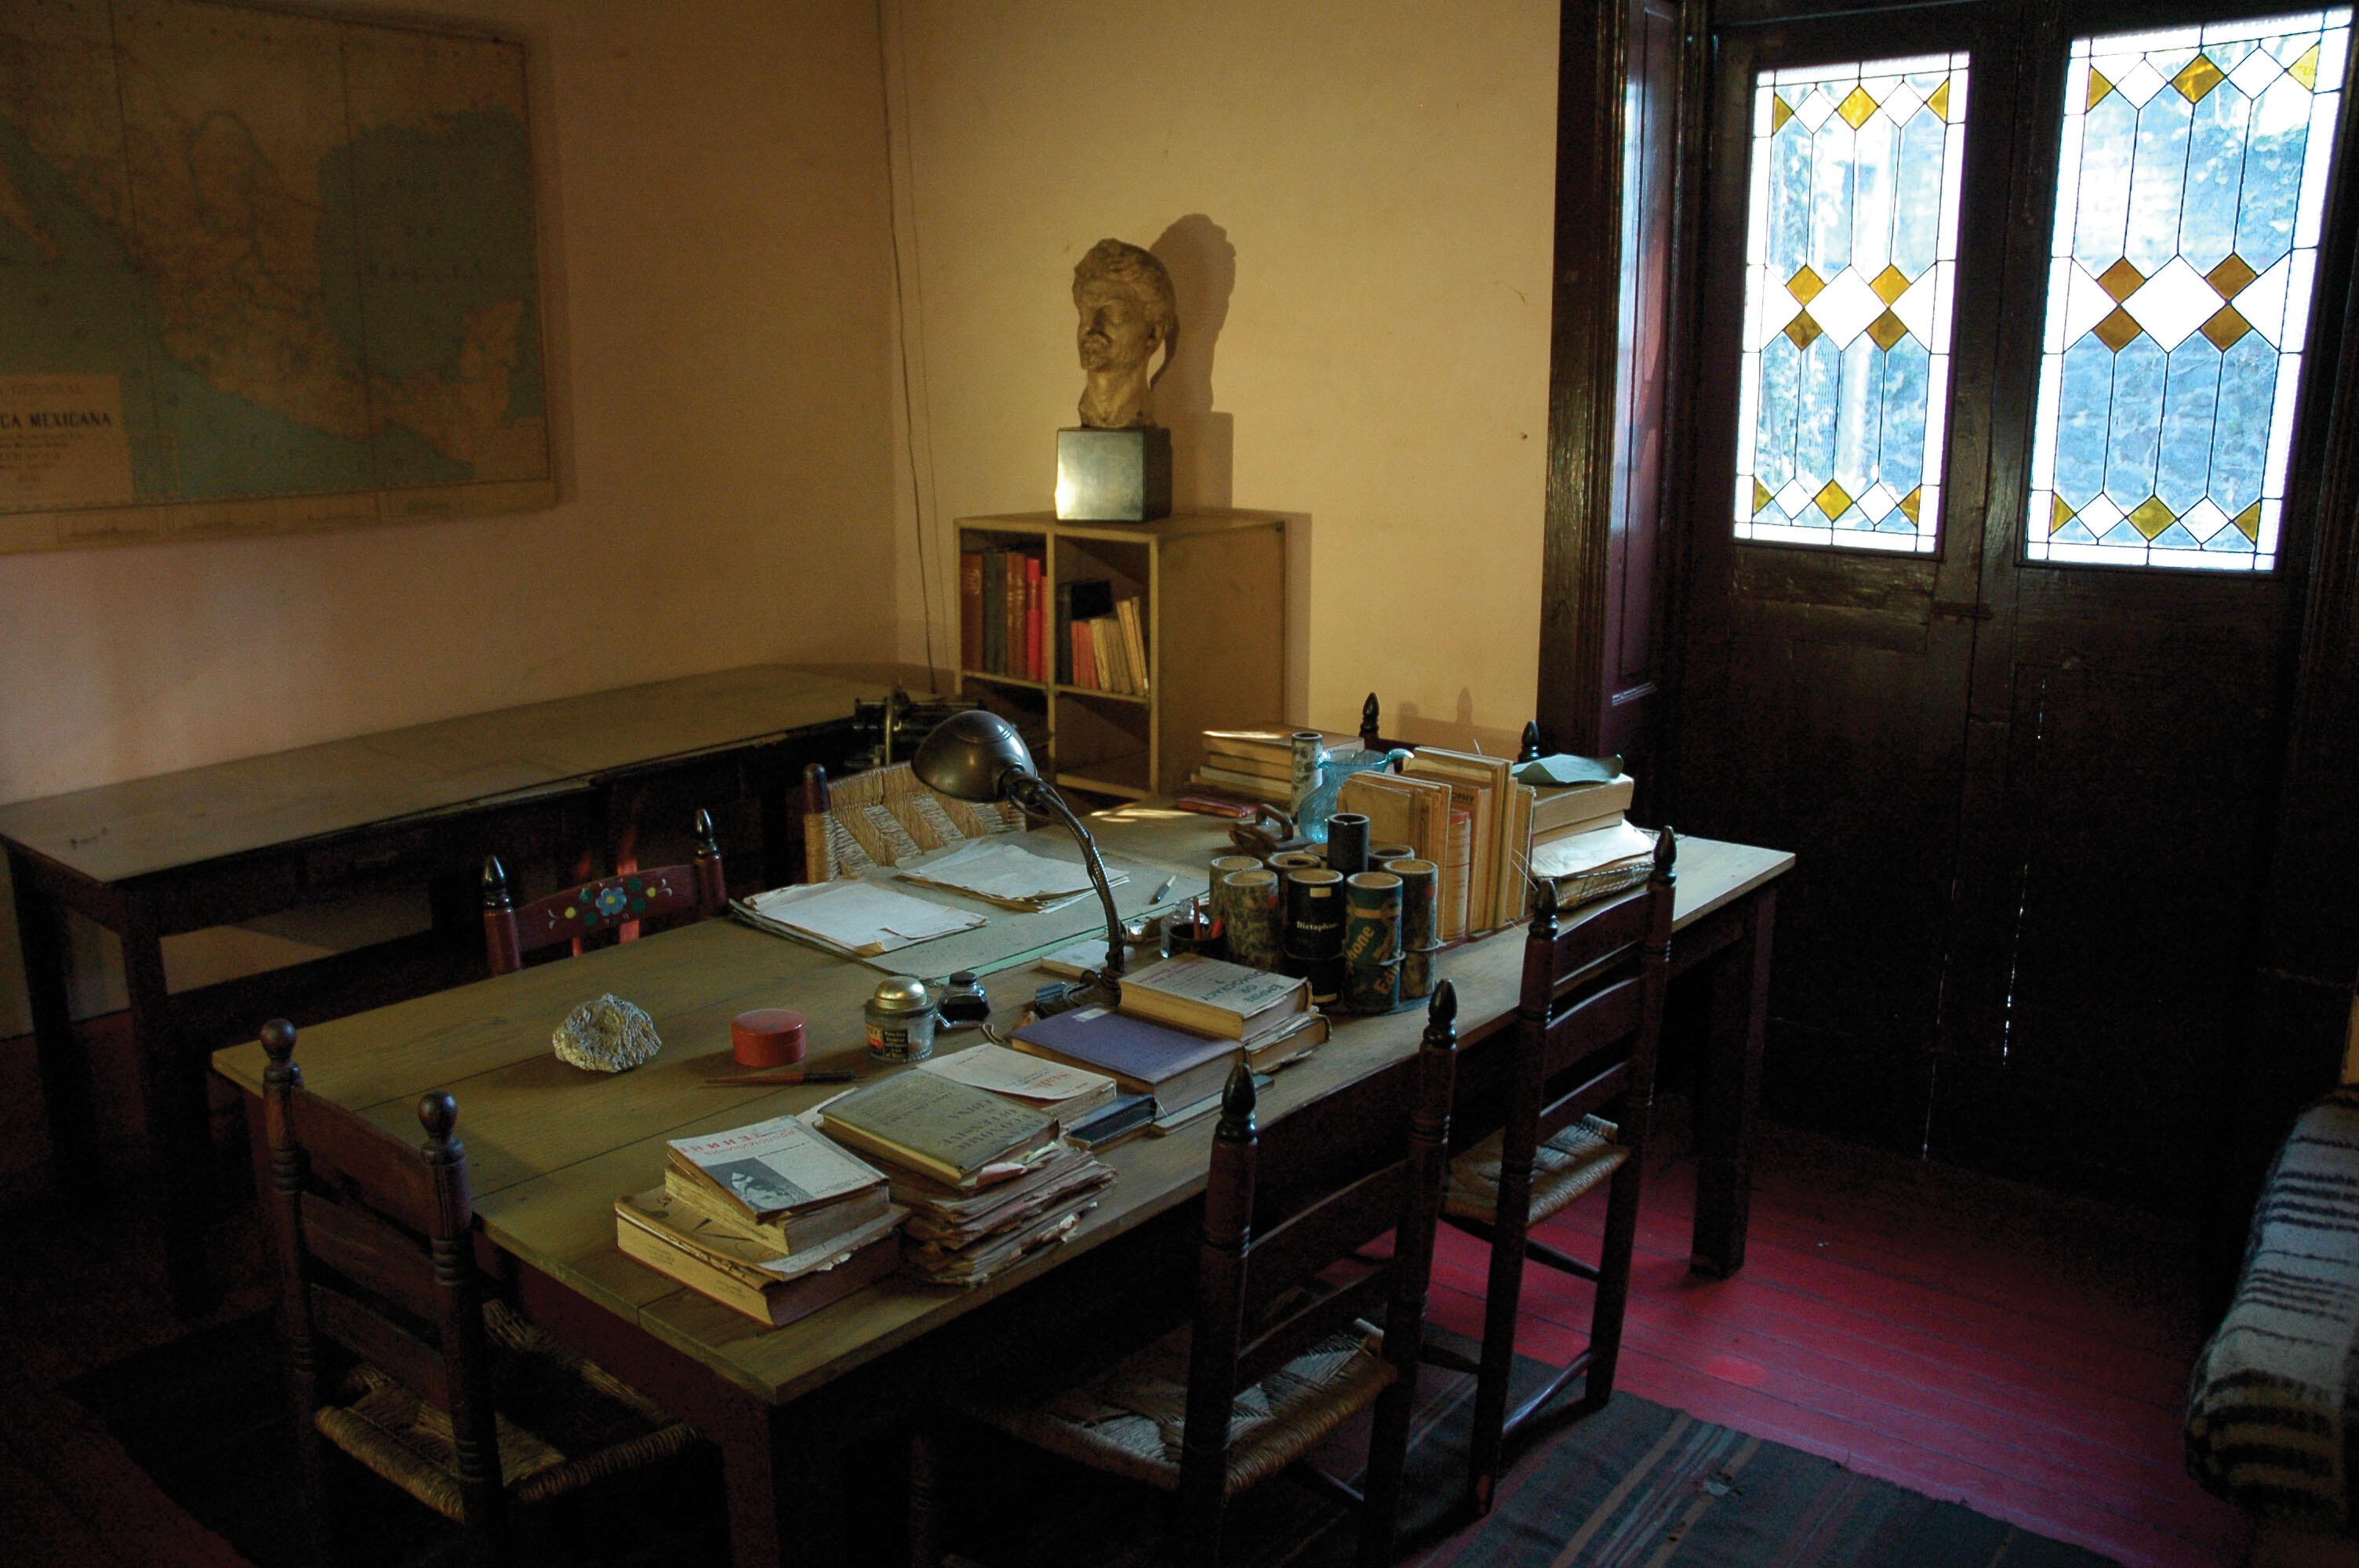 Trotsky's study in Mexico City has been preserved as it was on the day he died. (Photo by Carlos Lowry.)